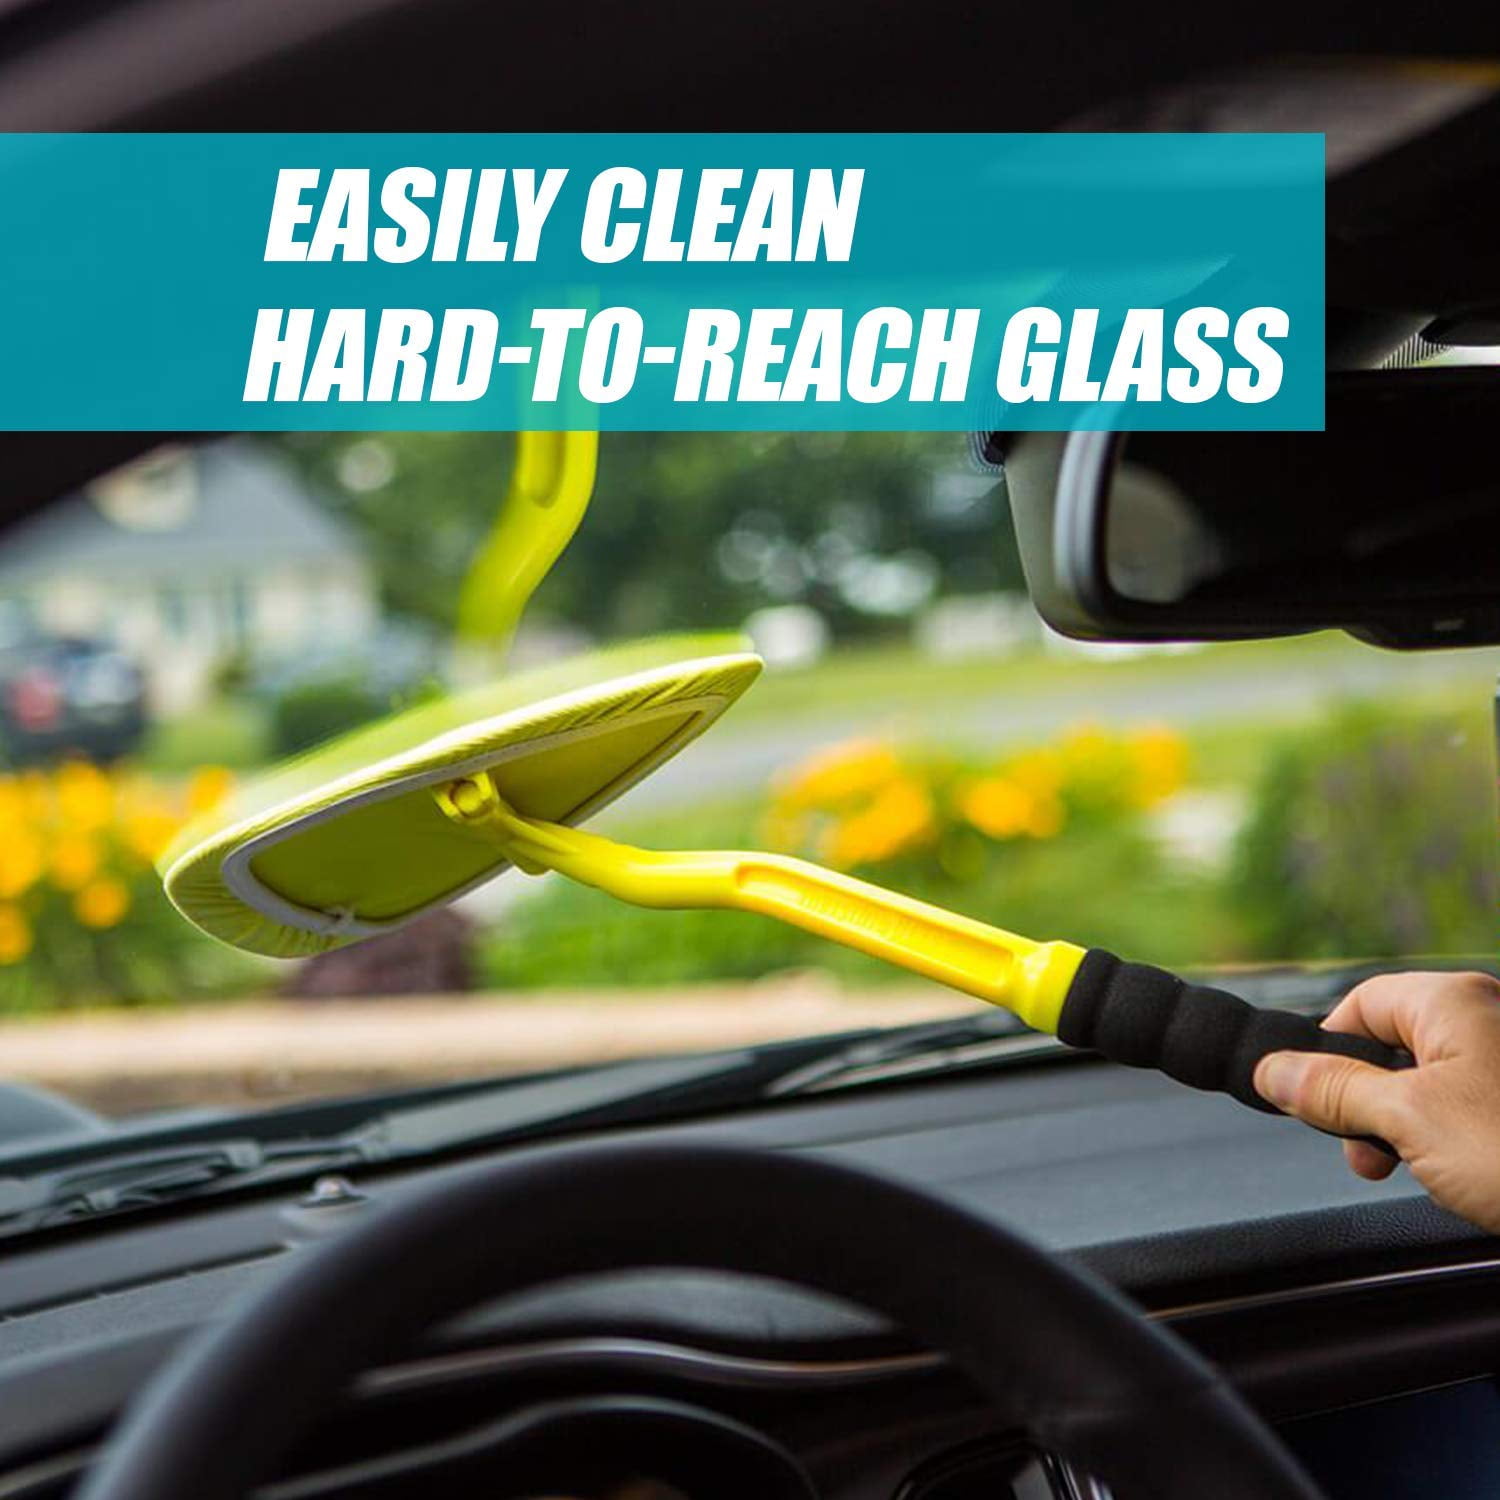 Car & Home Inside Interior Exterior Use Unique Car Pivoting Triangular Head Window Glass Cleaner AD AIDO Windshield Cleaner 1 Reusable Microfiber Pads with Long-Reach Handle 